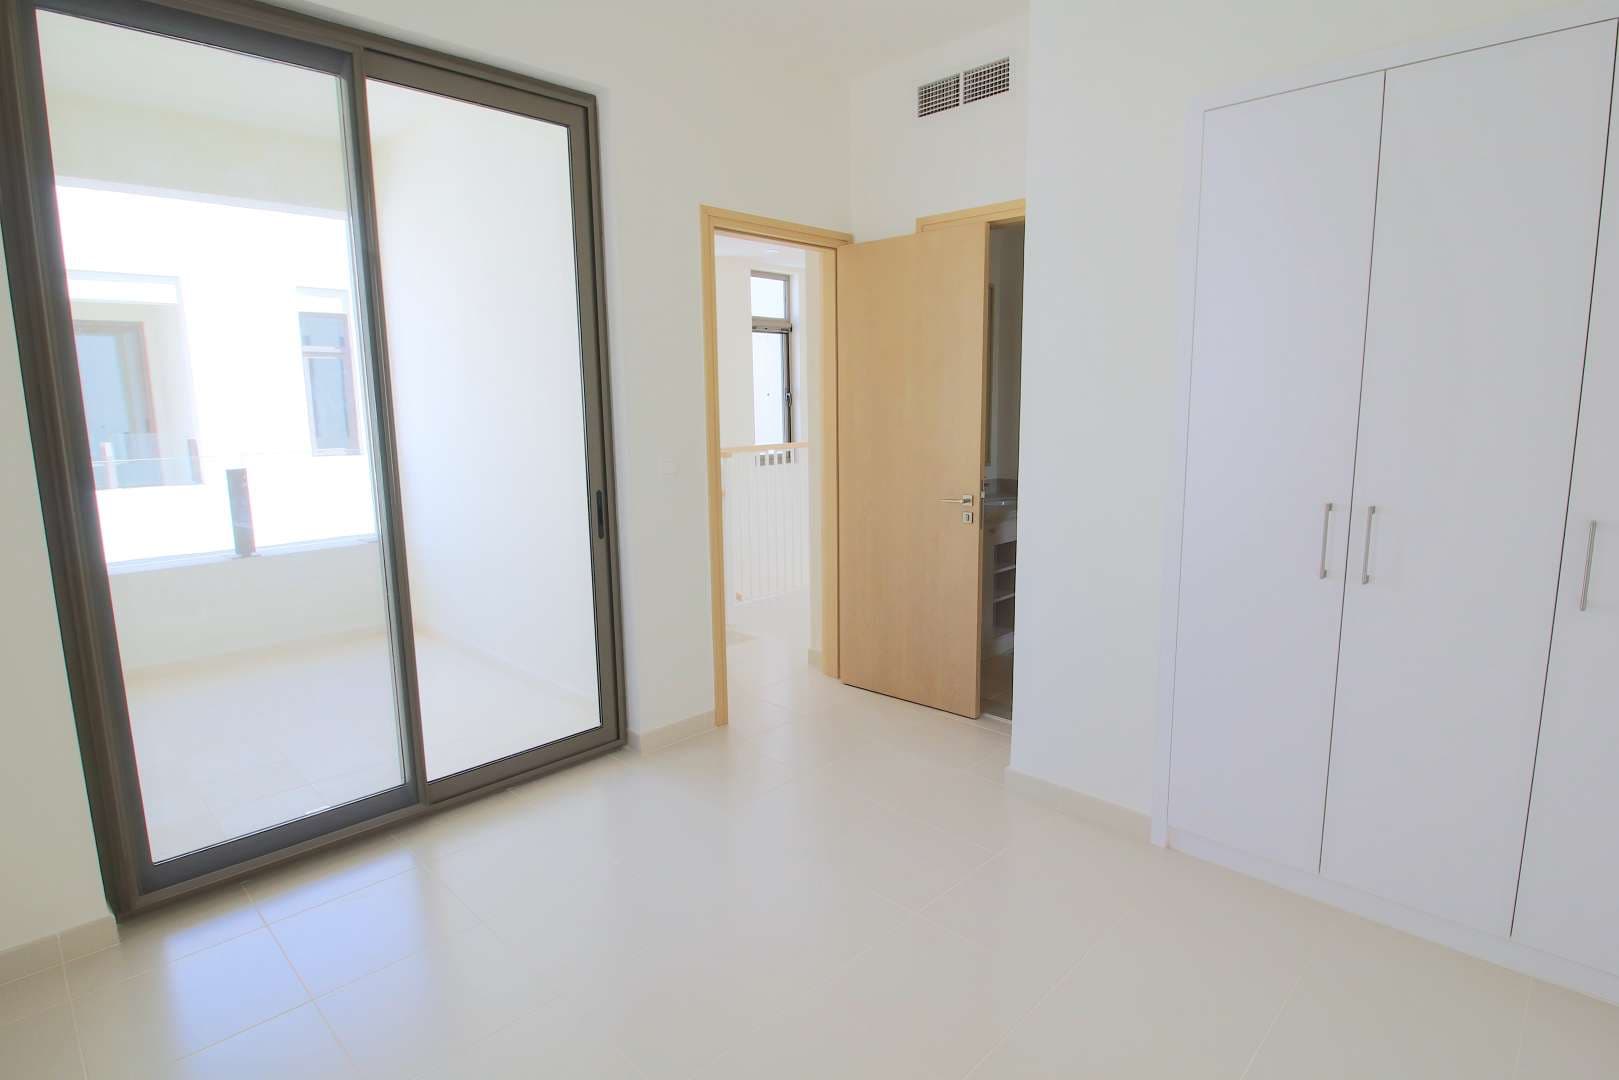 3 Bedroom Townhouse For Rent Mira Oasis Lp05250 2341a69671666400.jpg